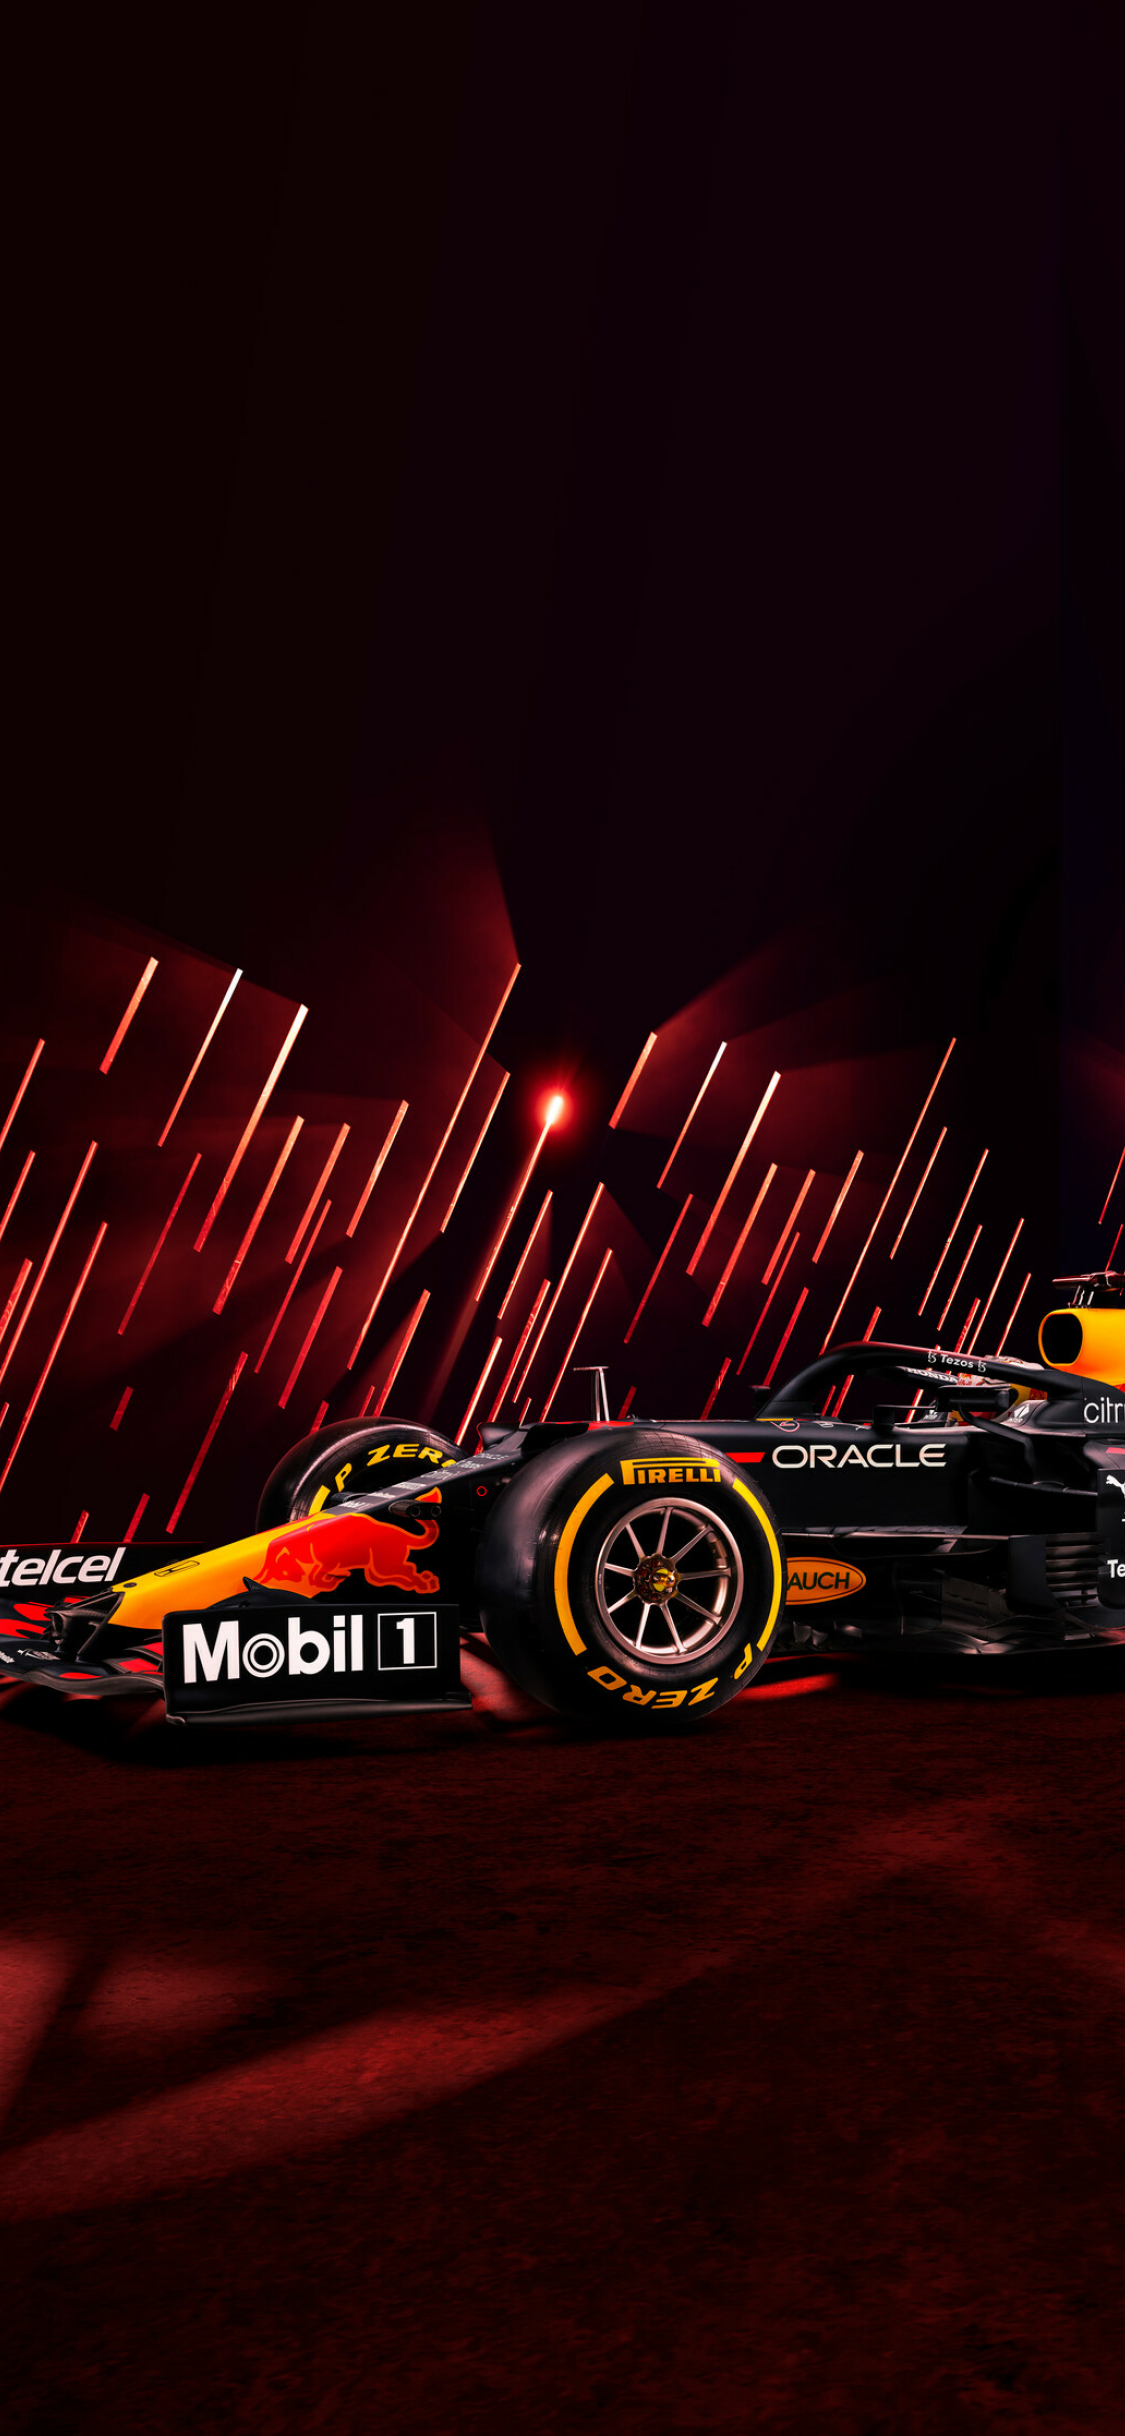 1125x2436 Red Bull Racing 22 Formula One 22 Iphone Xs Iphone 10 Iphone X Wallpaper Hd Games 4k Wallpapers Images Photos And Background Wallpapers Den